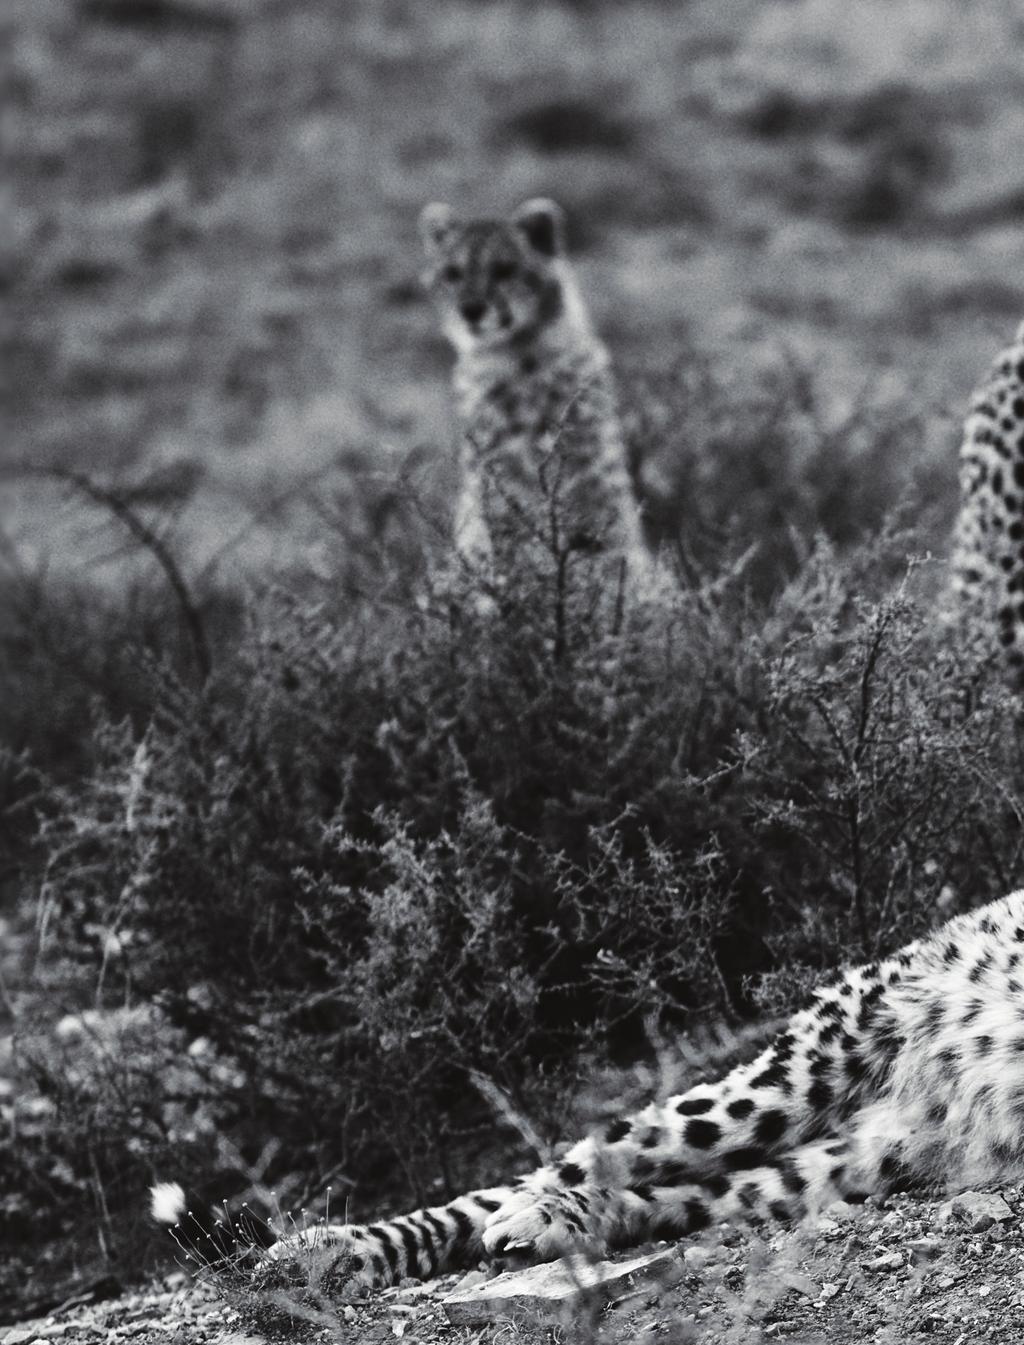 COVER STORY Racing Against Extinction With the cheetah species facing a fight for